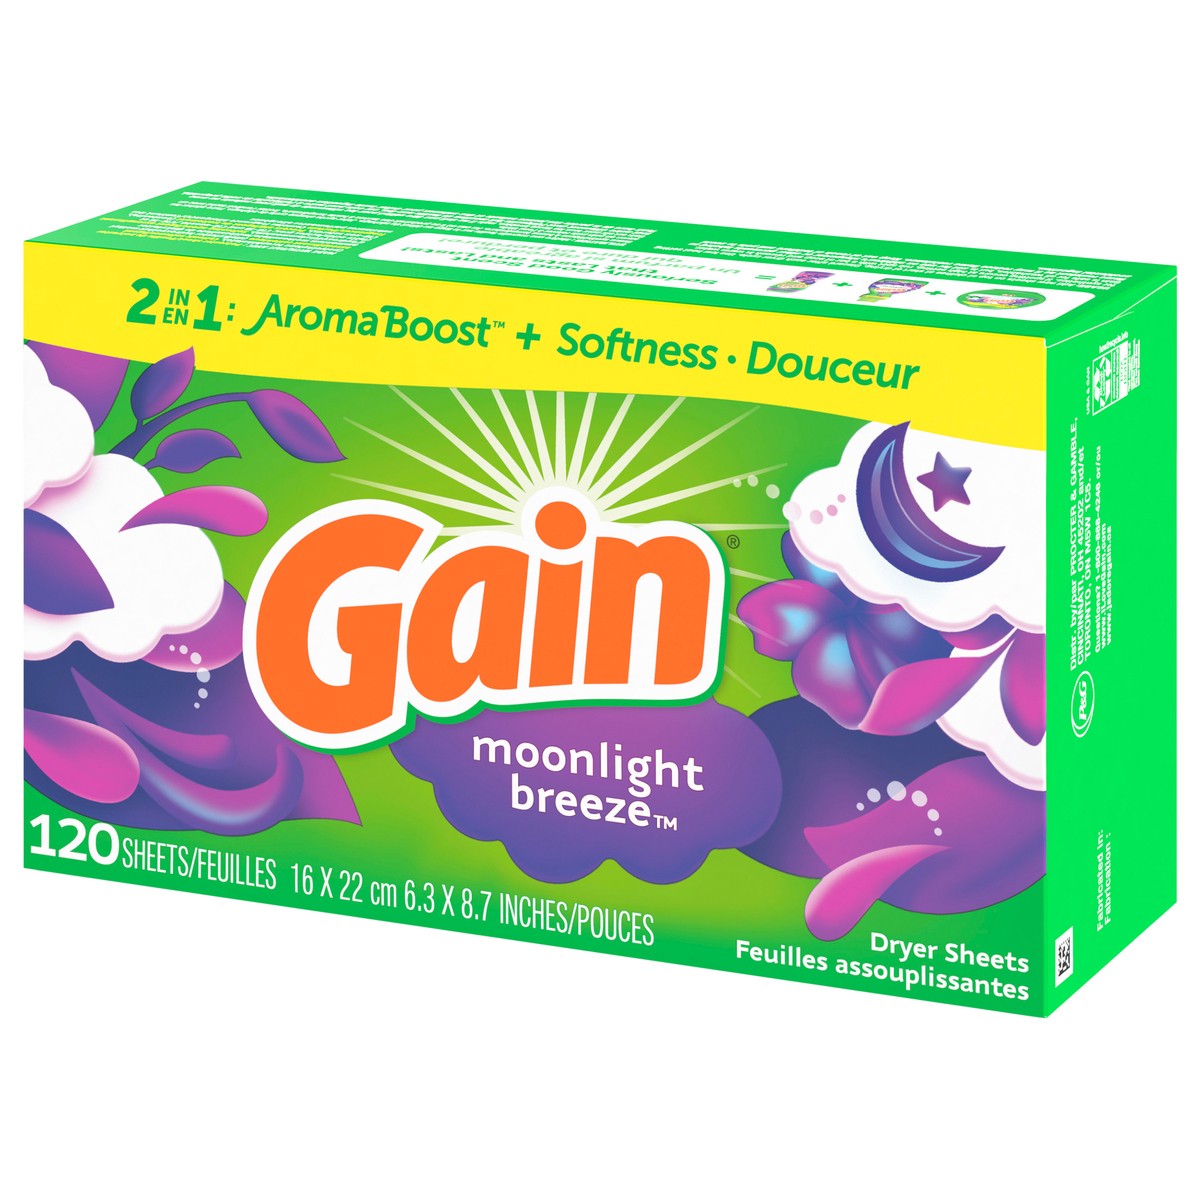 slide 7 of 12, Gain dryer sheets, 120 Count, Moonlight Breeze Scent Laundry Fabric Softener Sheets with 2-in-1 Aromaboost Plus Softness, 120 ct